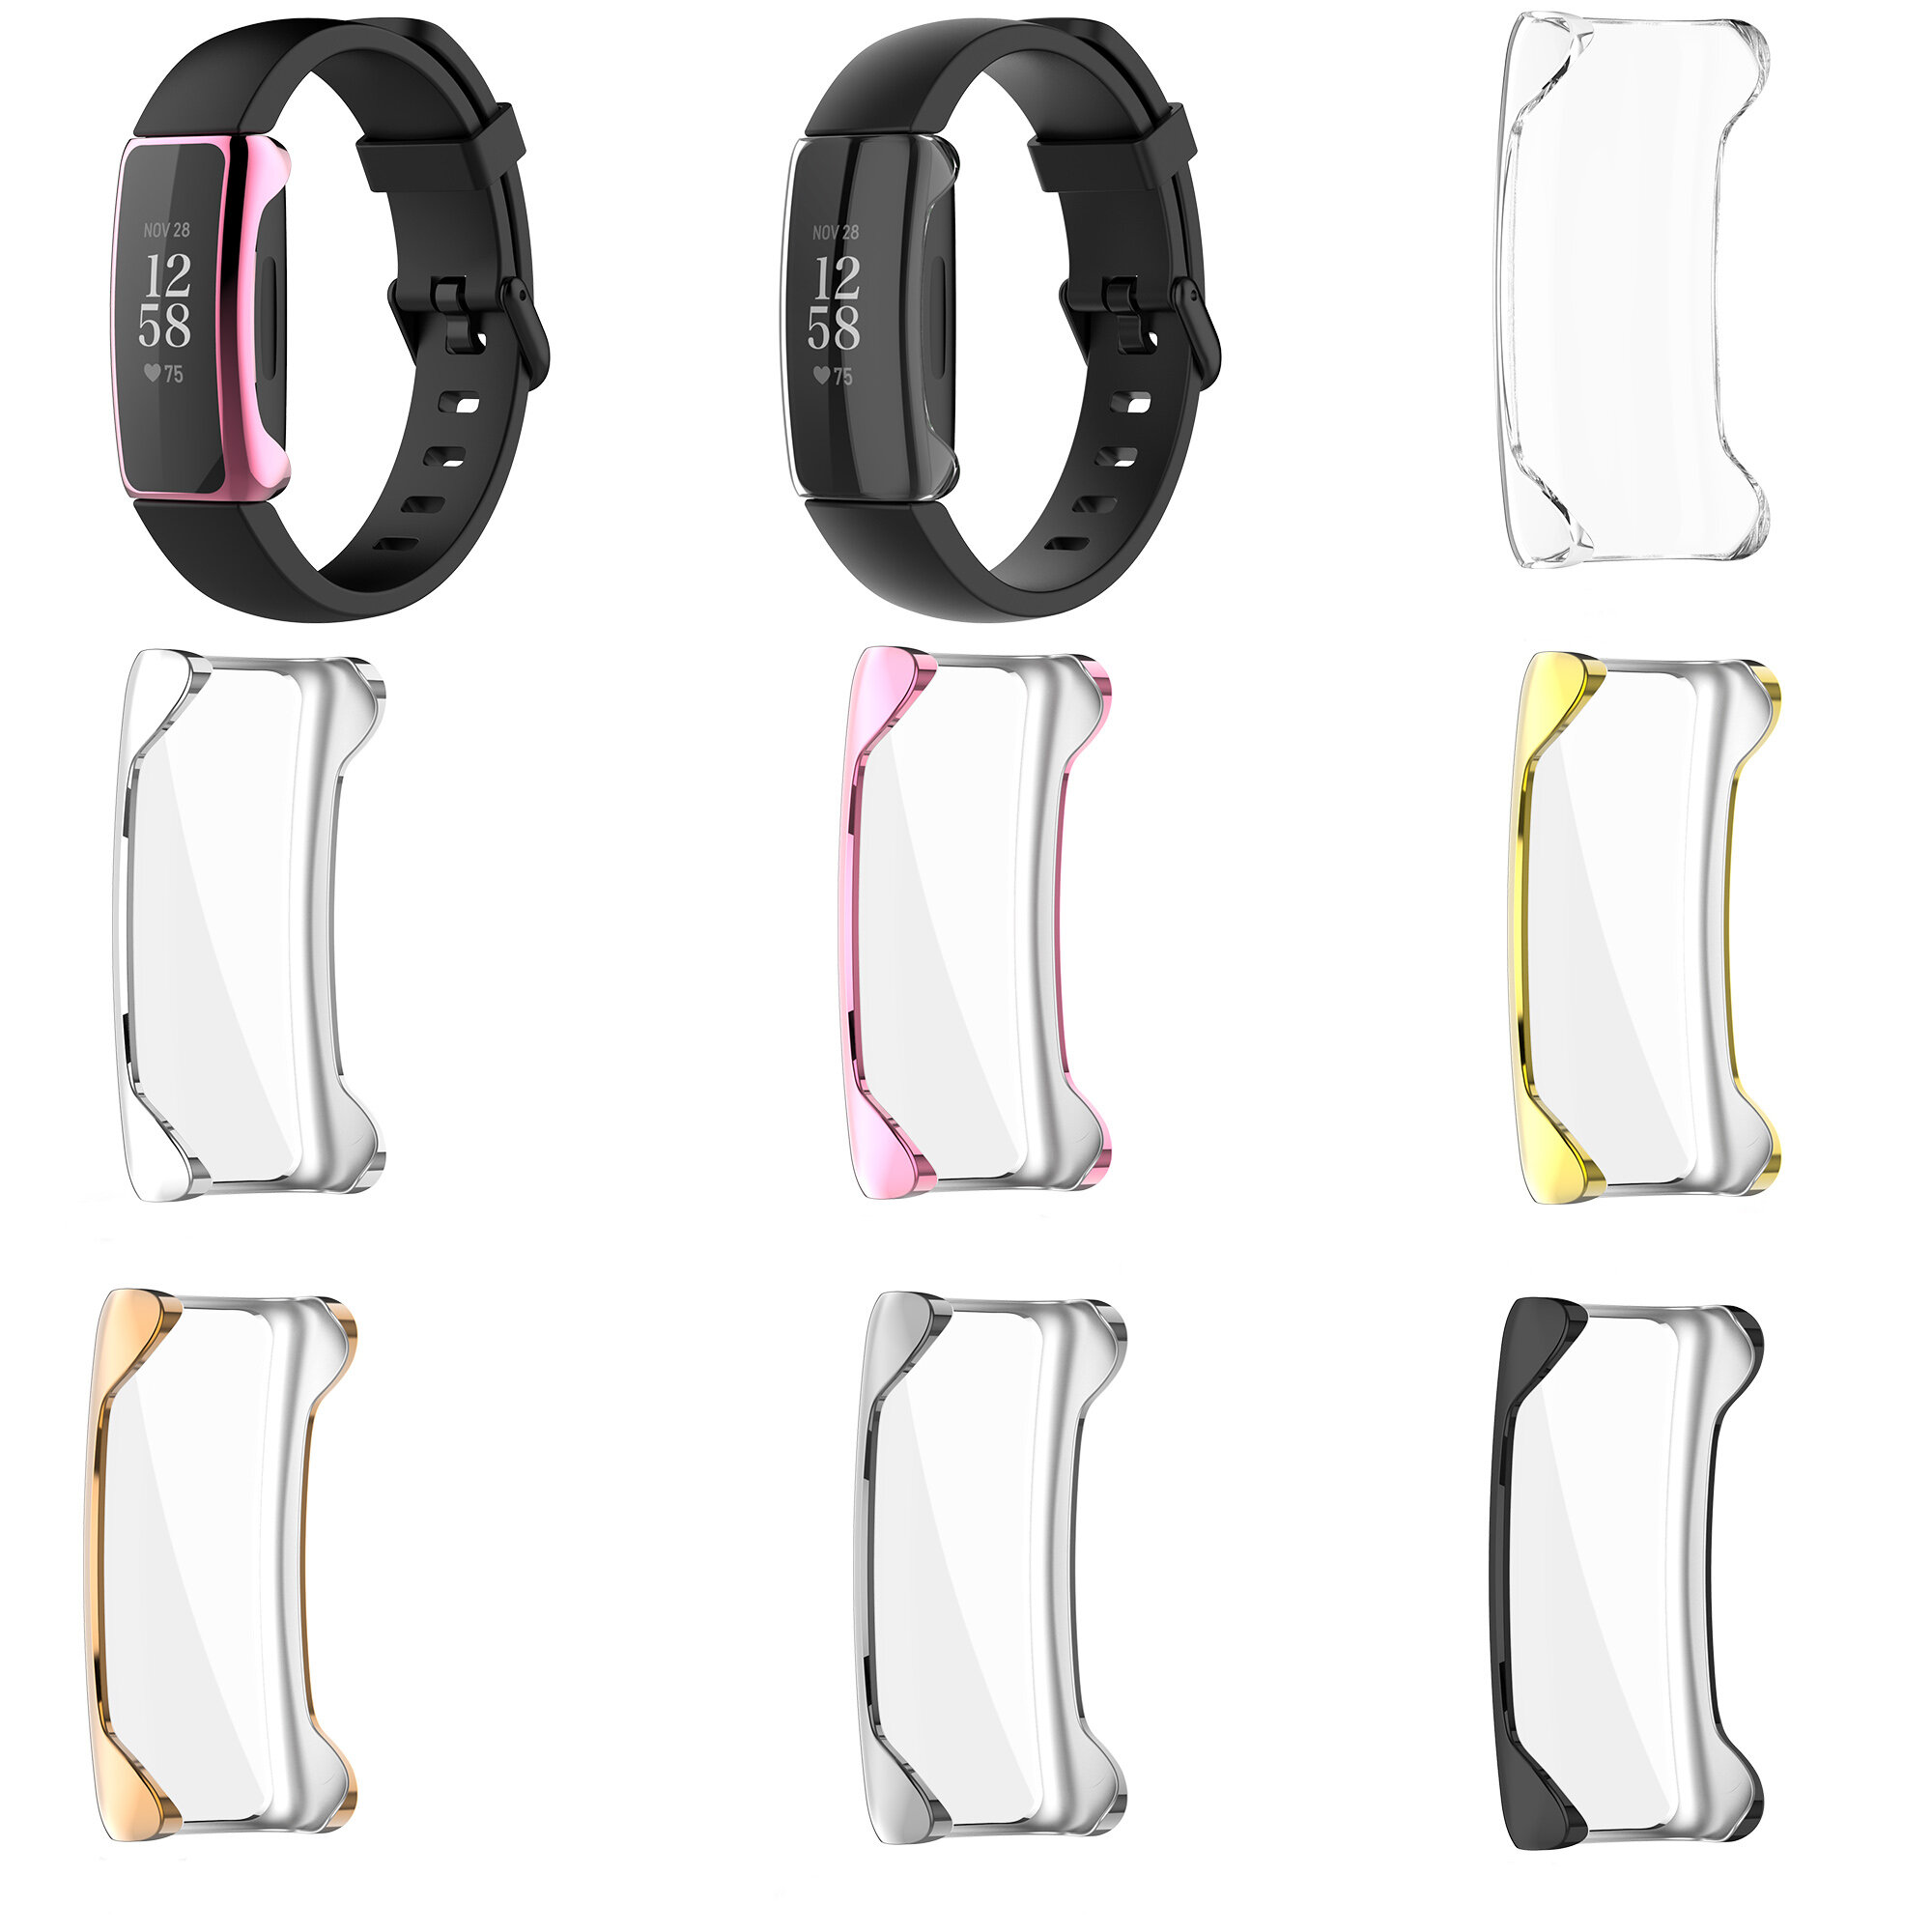 

Bakeey All-inclusive Anti-drop TPU Watch Case Cover Watch Shell Protector For Fitbit Inspire 2